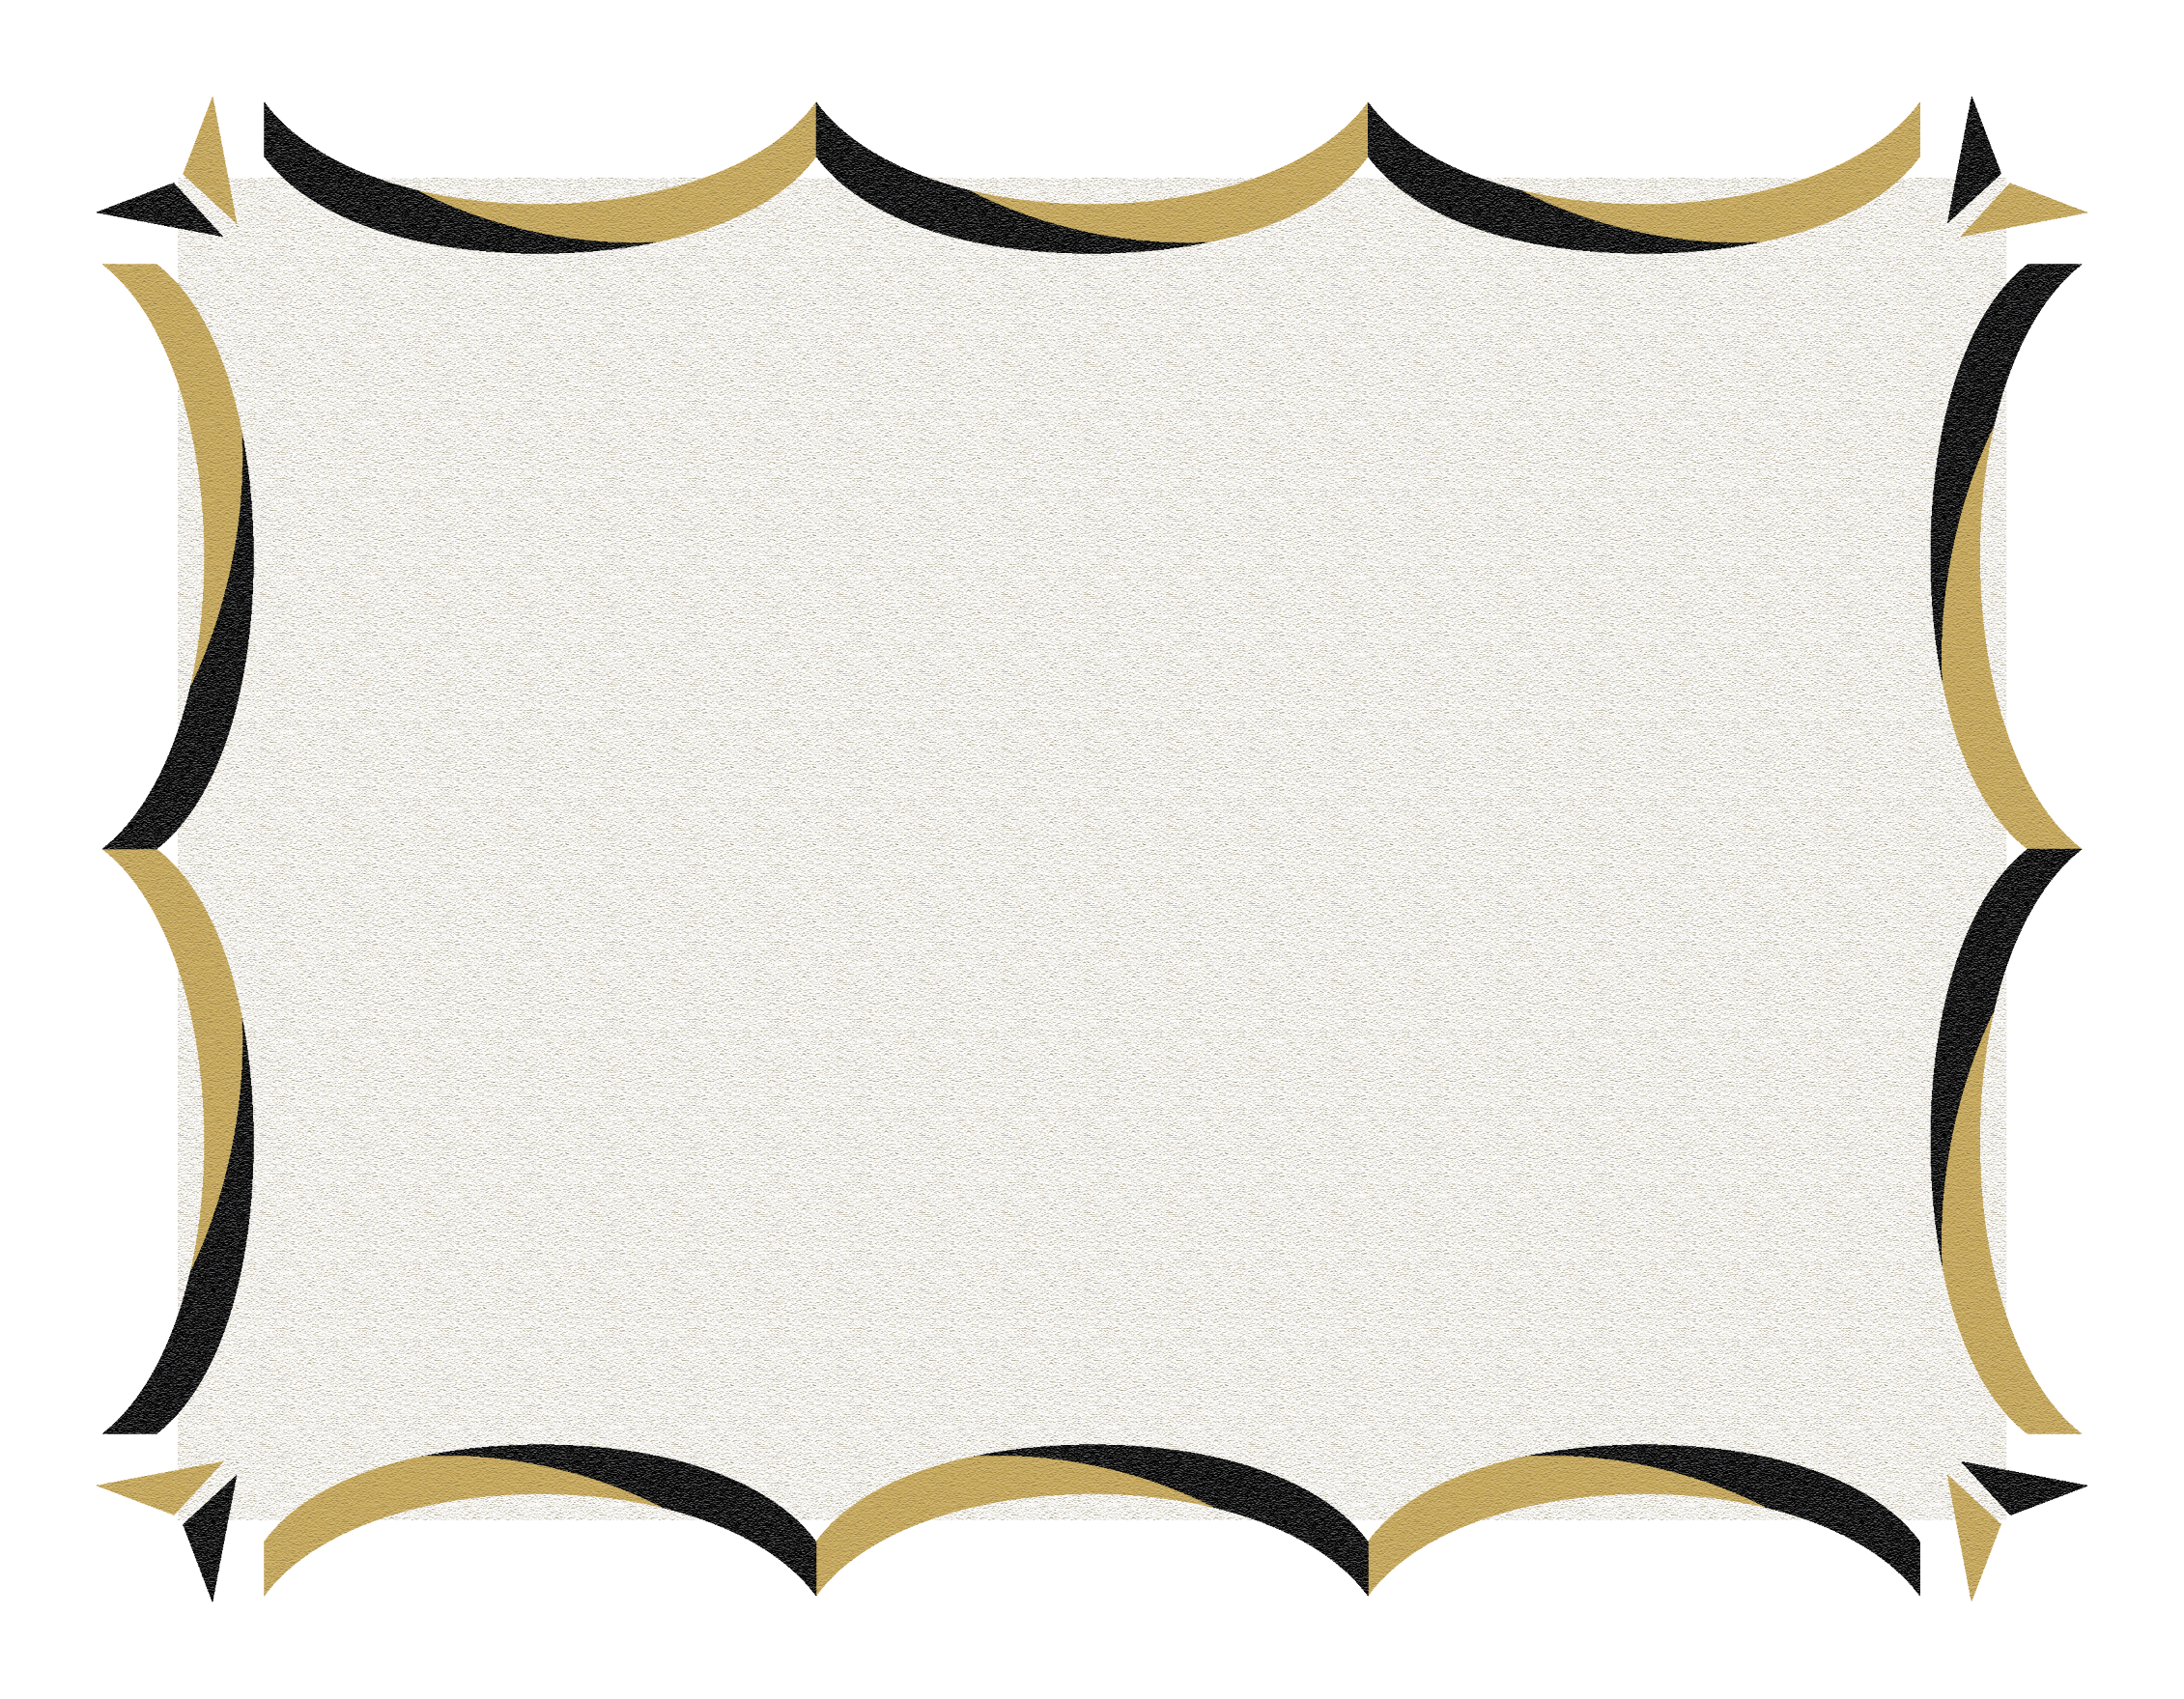 Gold And Black Border Page   Clipart Best   Clipart Best